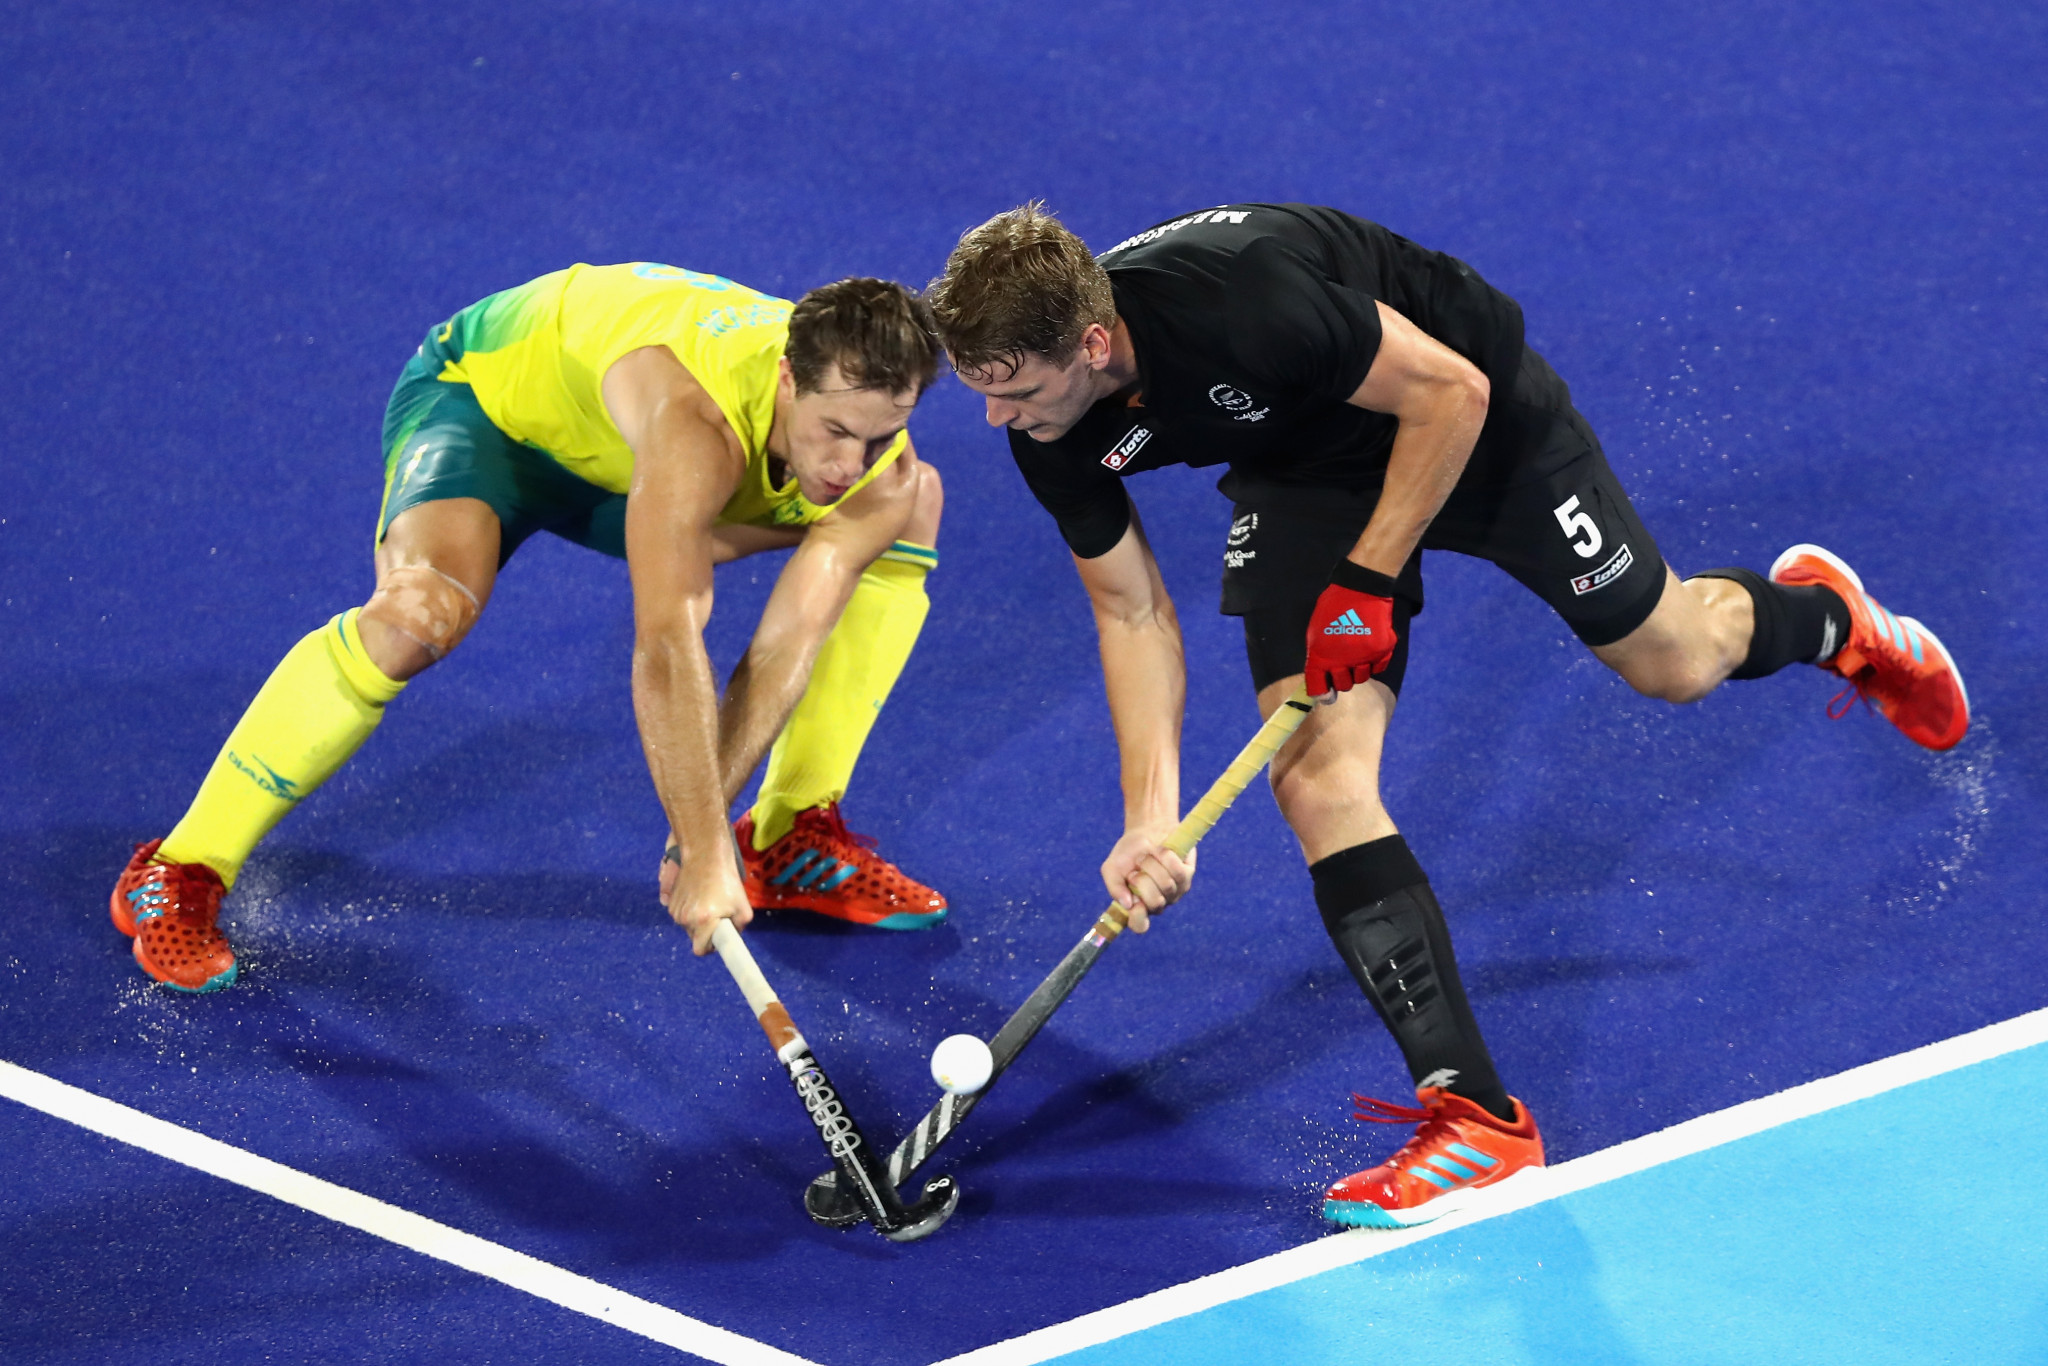 The agreement is designed to extend hockey's reach around the world ©Getty Images